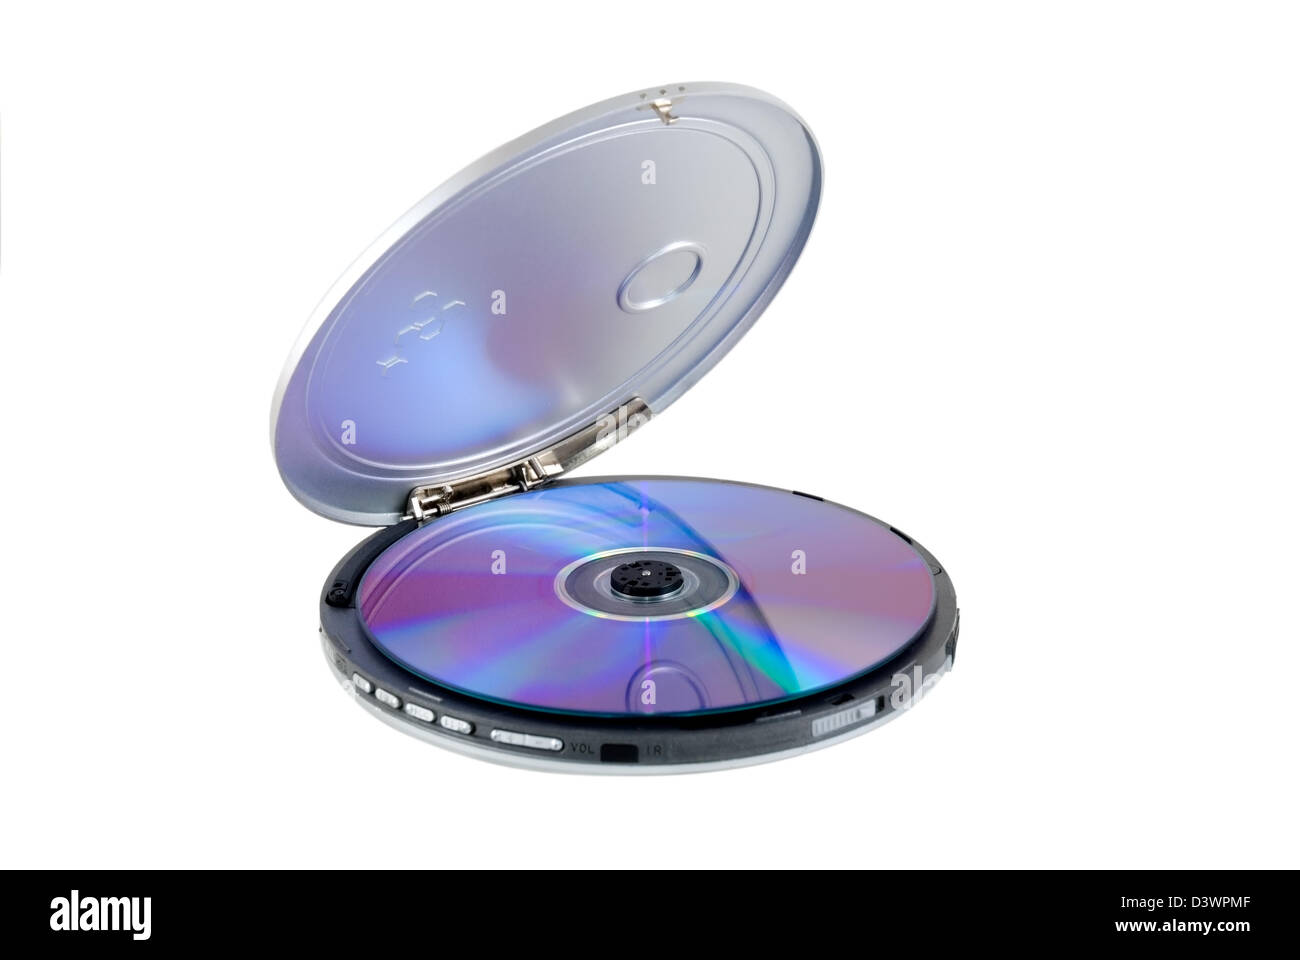 CD-player with disk is photographed on a white background Stock Photo